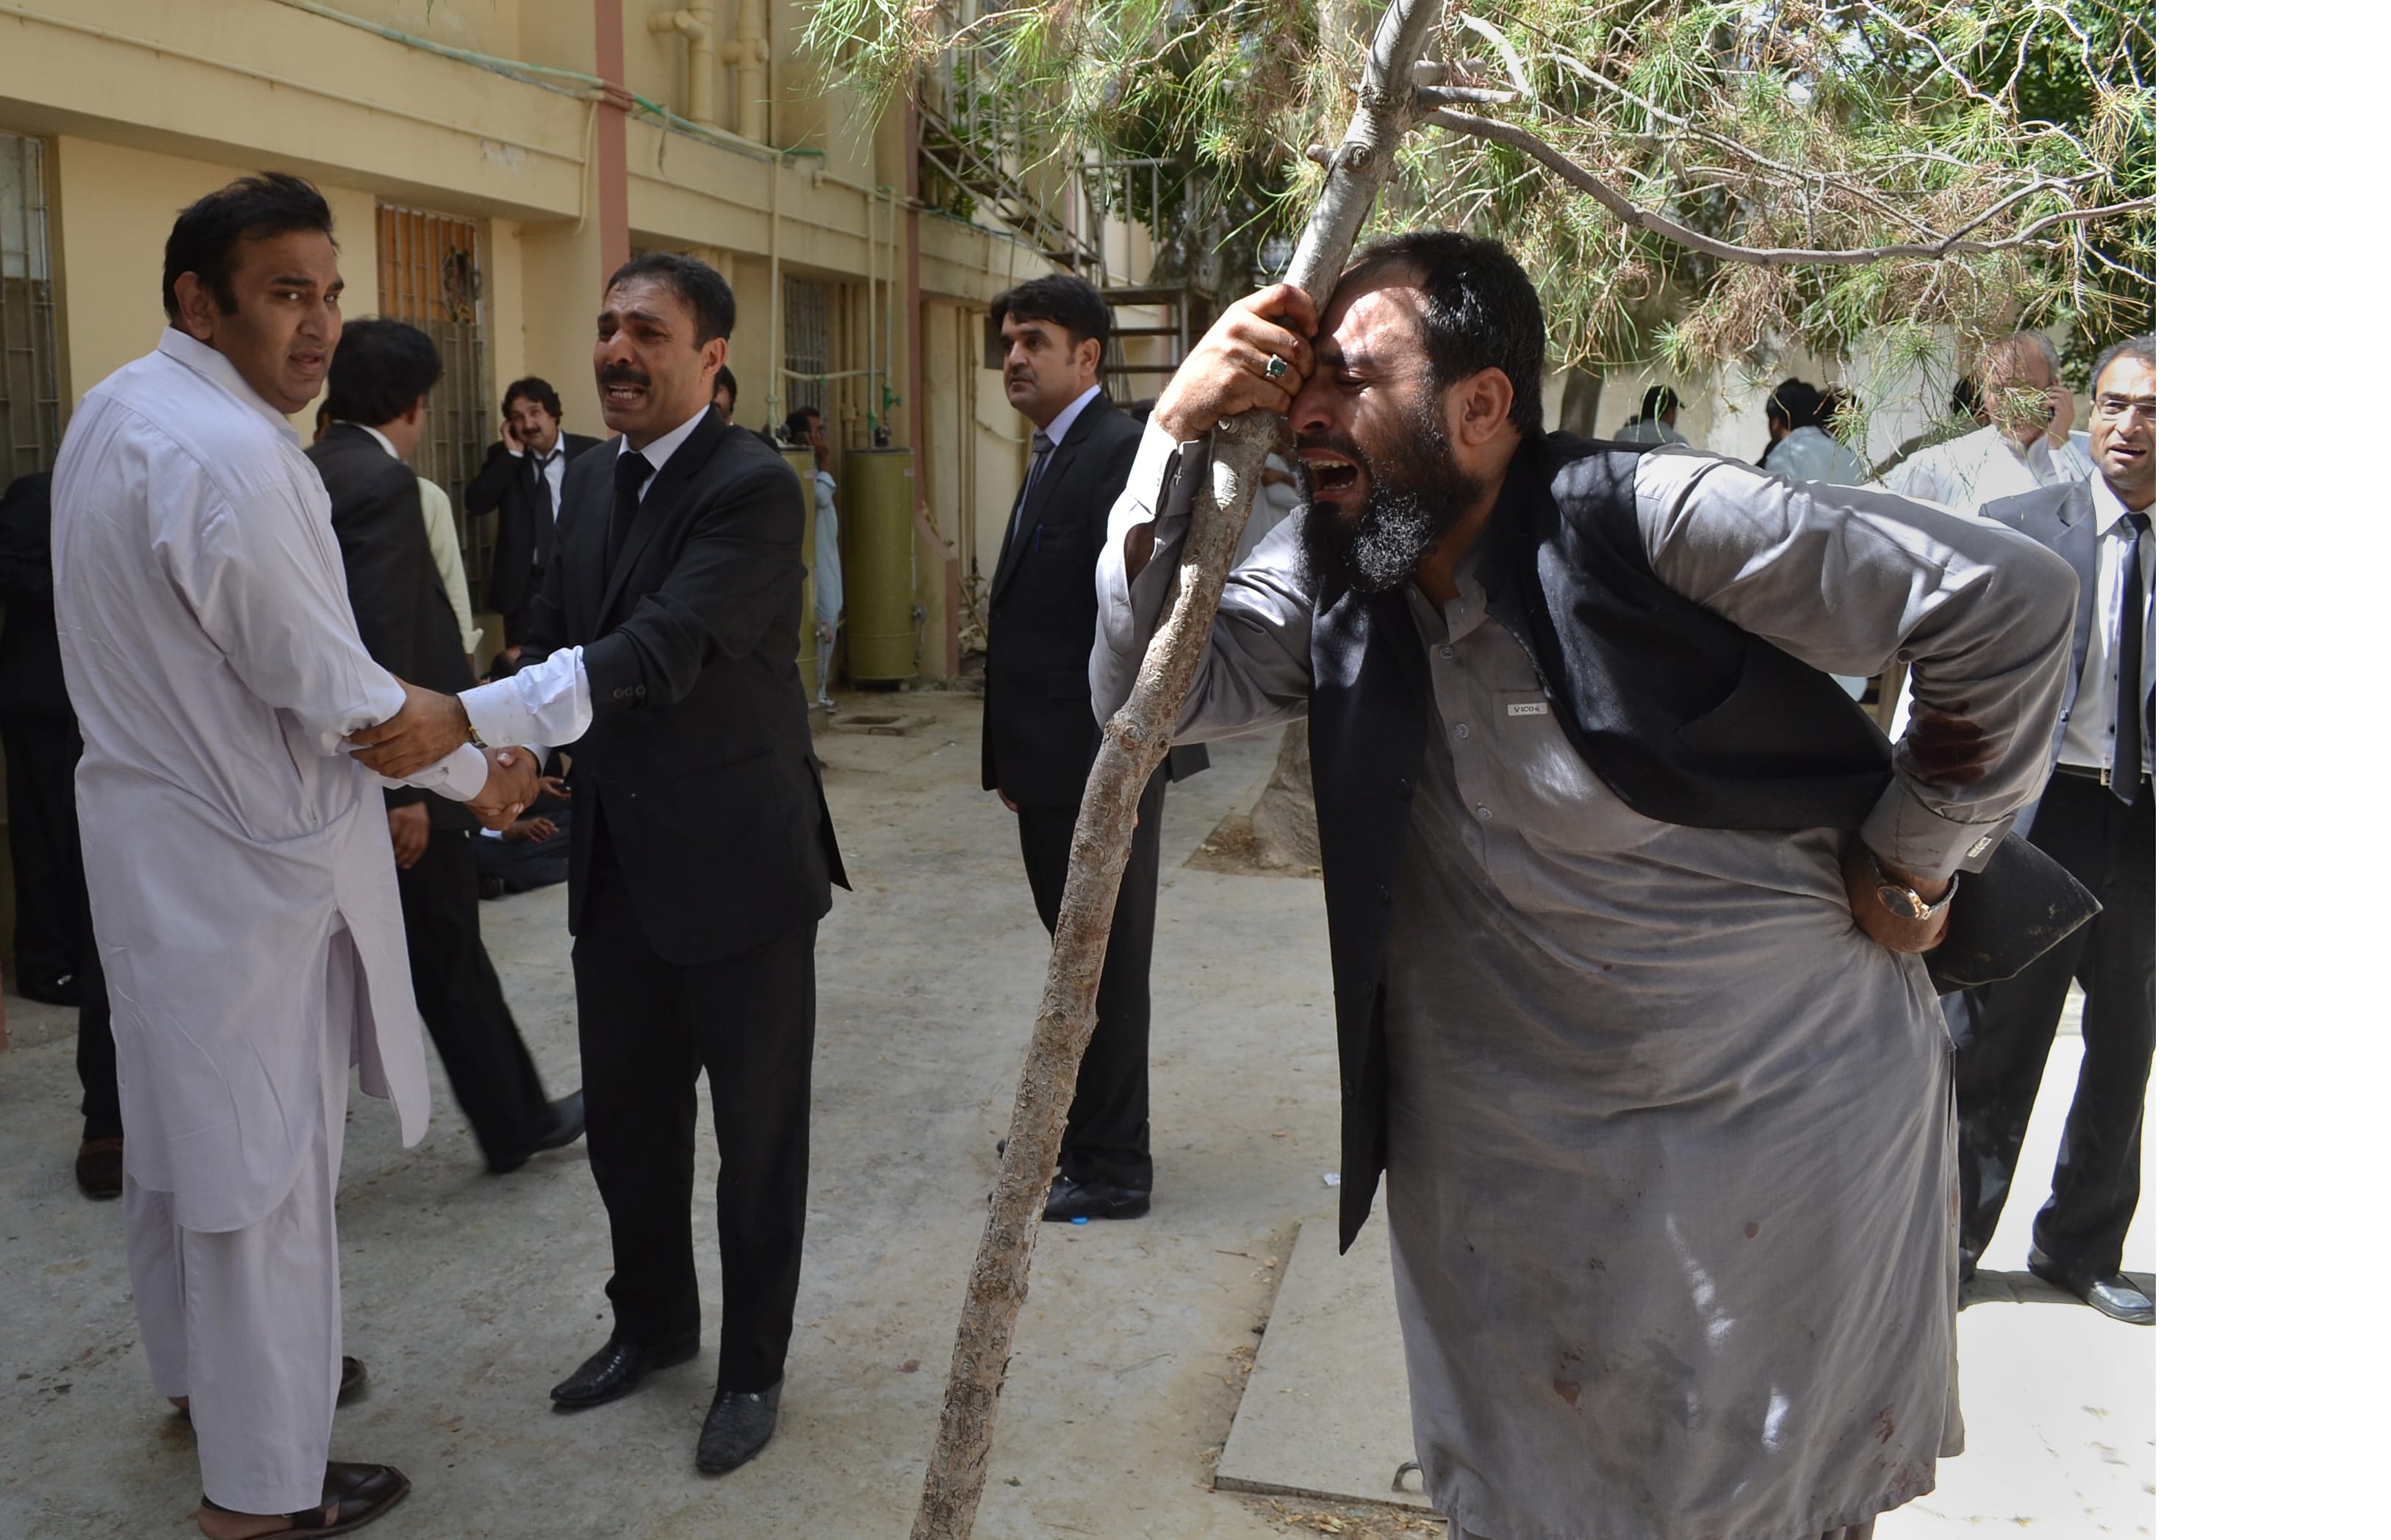 Pakistani lawyers mourn the deaths of their colleagues following a bomb blast in Quetta, Pakistan, Monday, Aug. 8, 2016. A powerful bomb went off inside a government-run hospital in the southwestern city of Quetta on Monday, killing dozens of people and wounding dozens of others, police said.